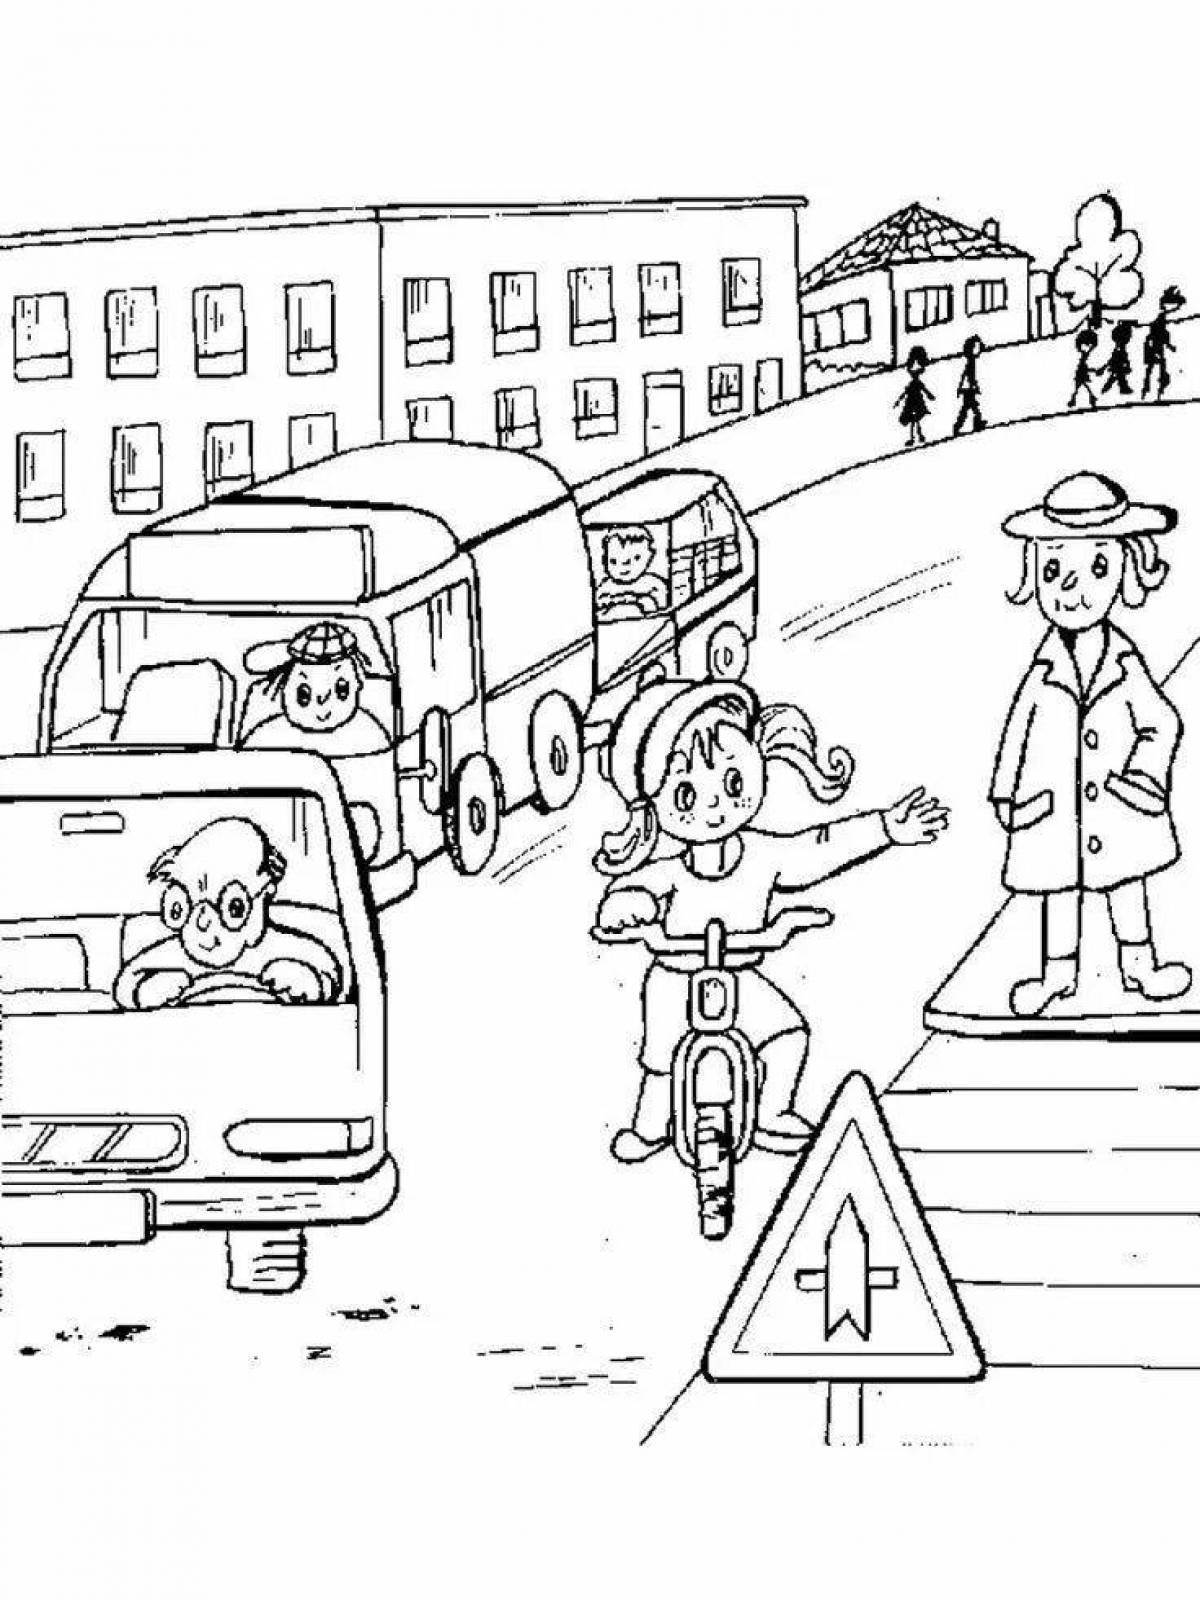 Creative traffic coloring page